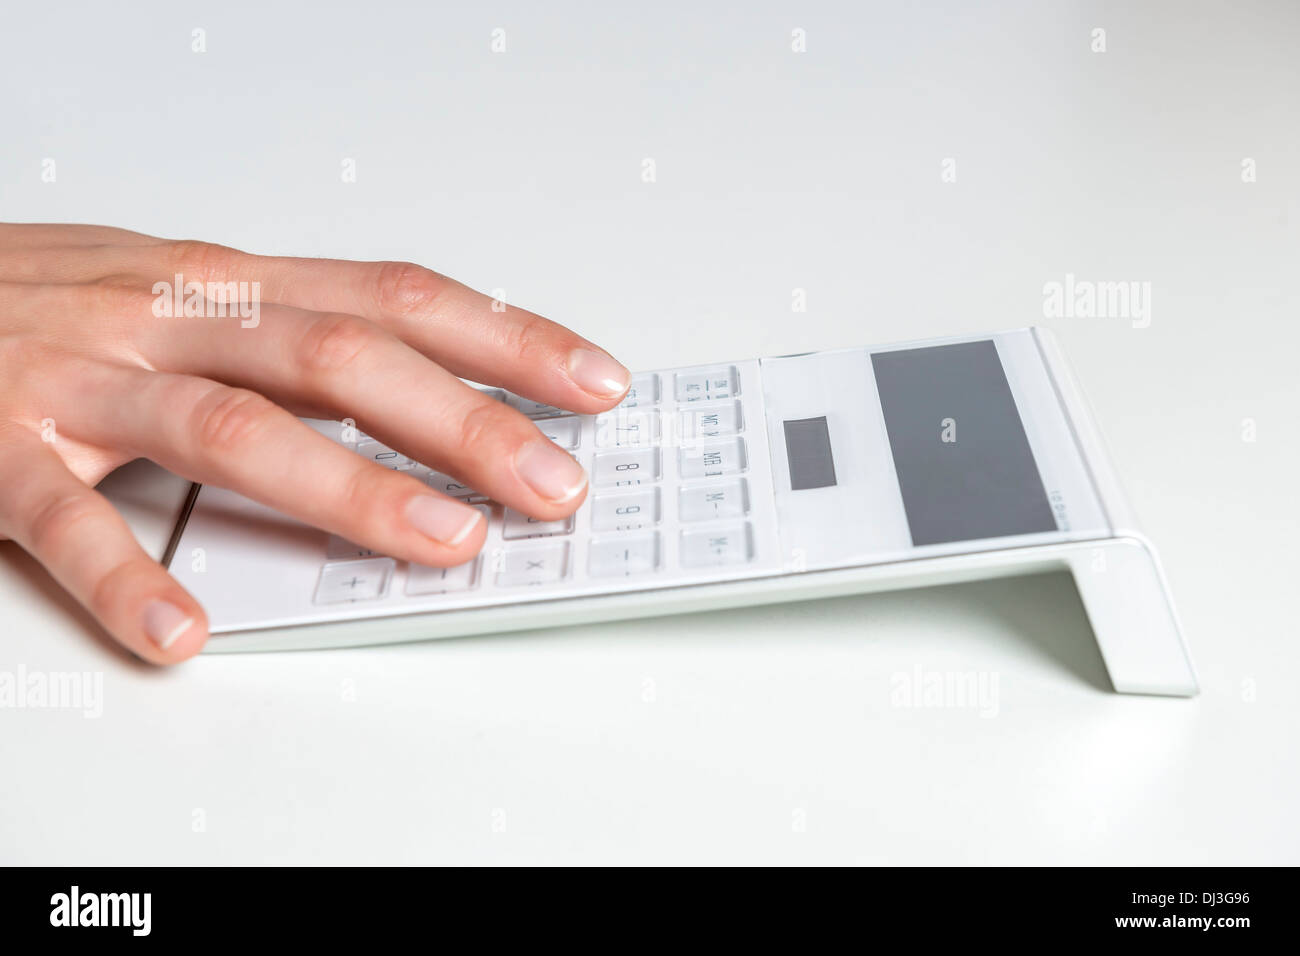 Picture of a female hand typing on a white calculator with empty display Stock Photo